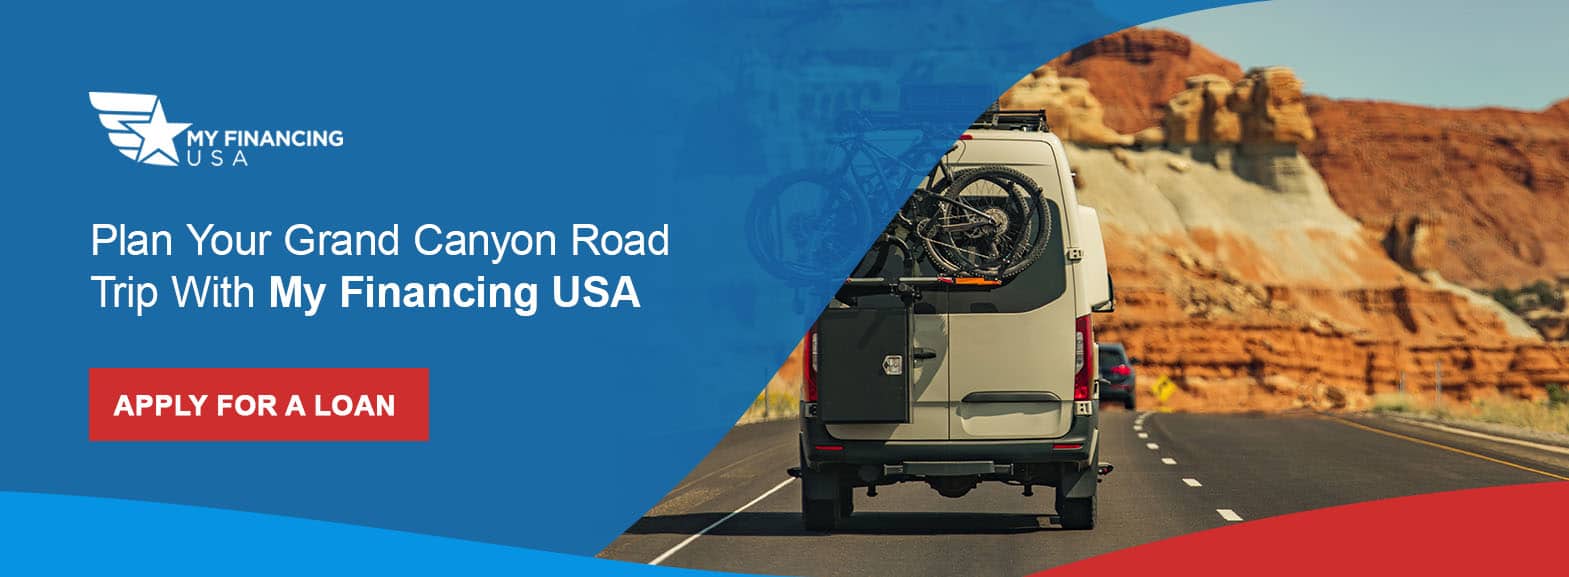 Plan Your Grand Canyon Road Trip With My Financing USA. Apply for a Loan!